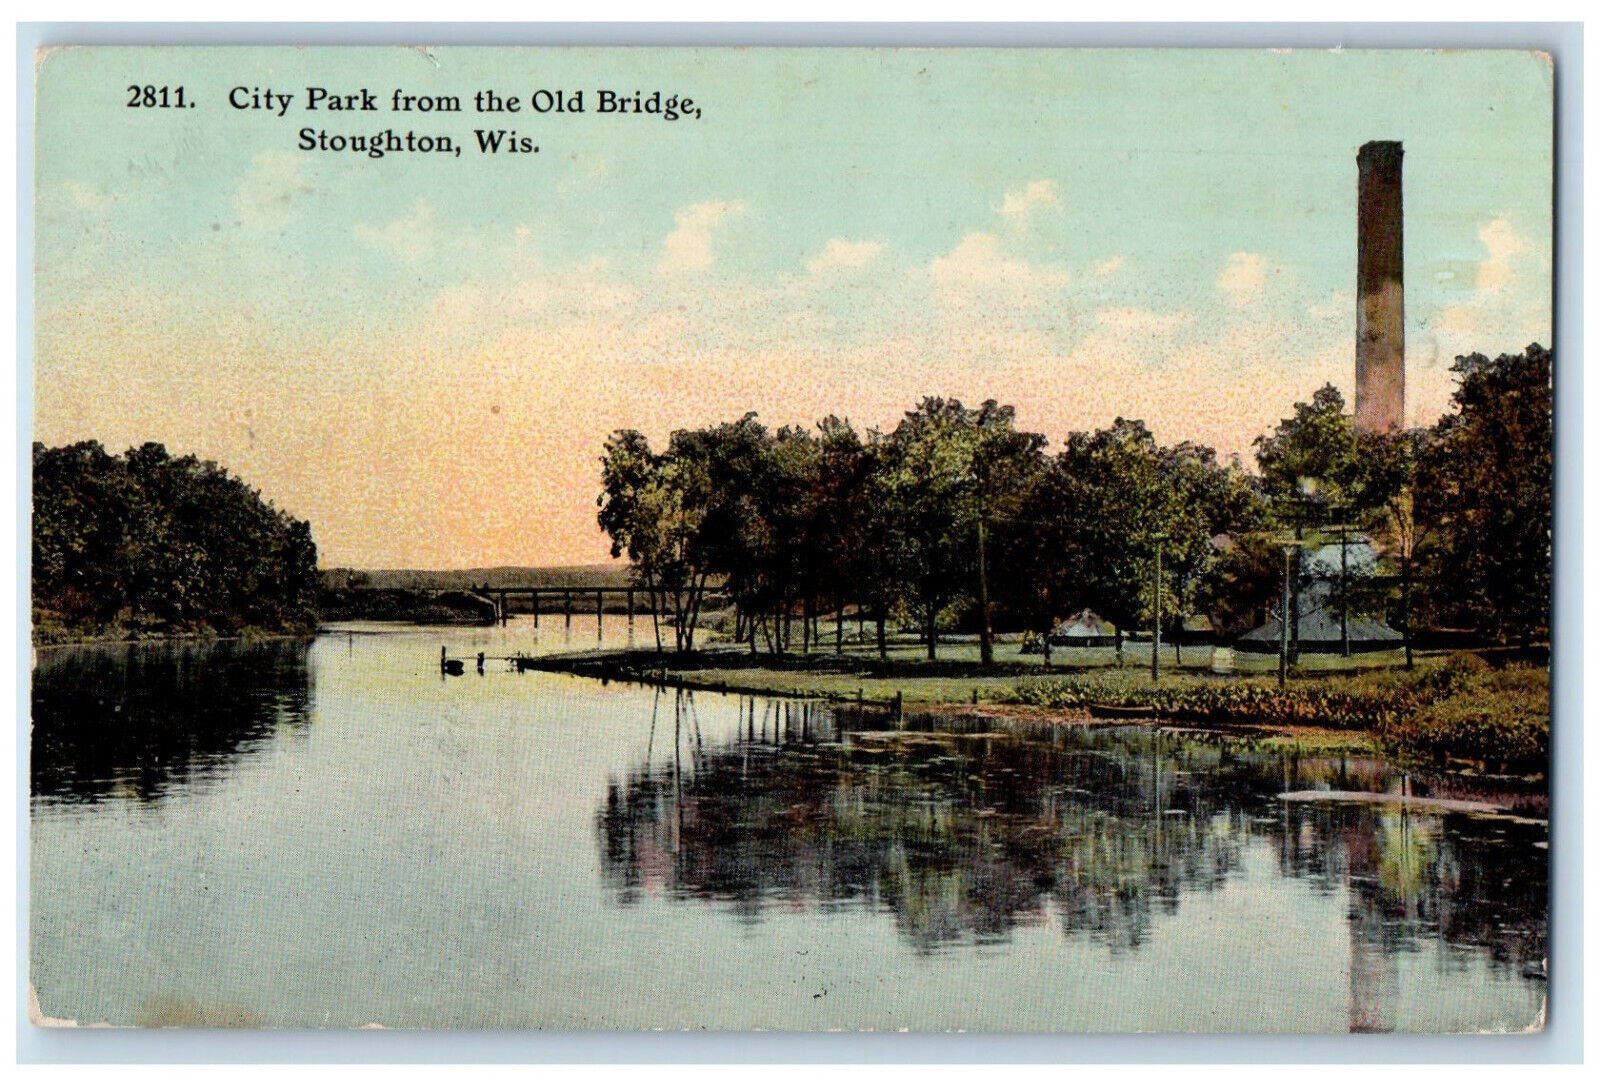 1920 City Park from the Old Bridge Stoughton Wisconsin WI Antique Postcard